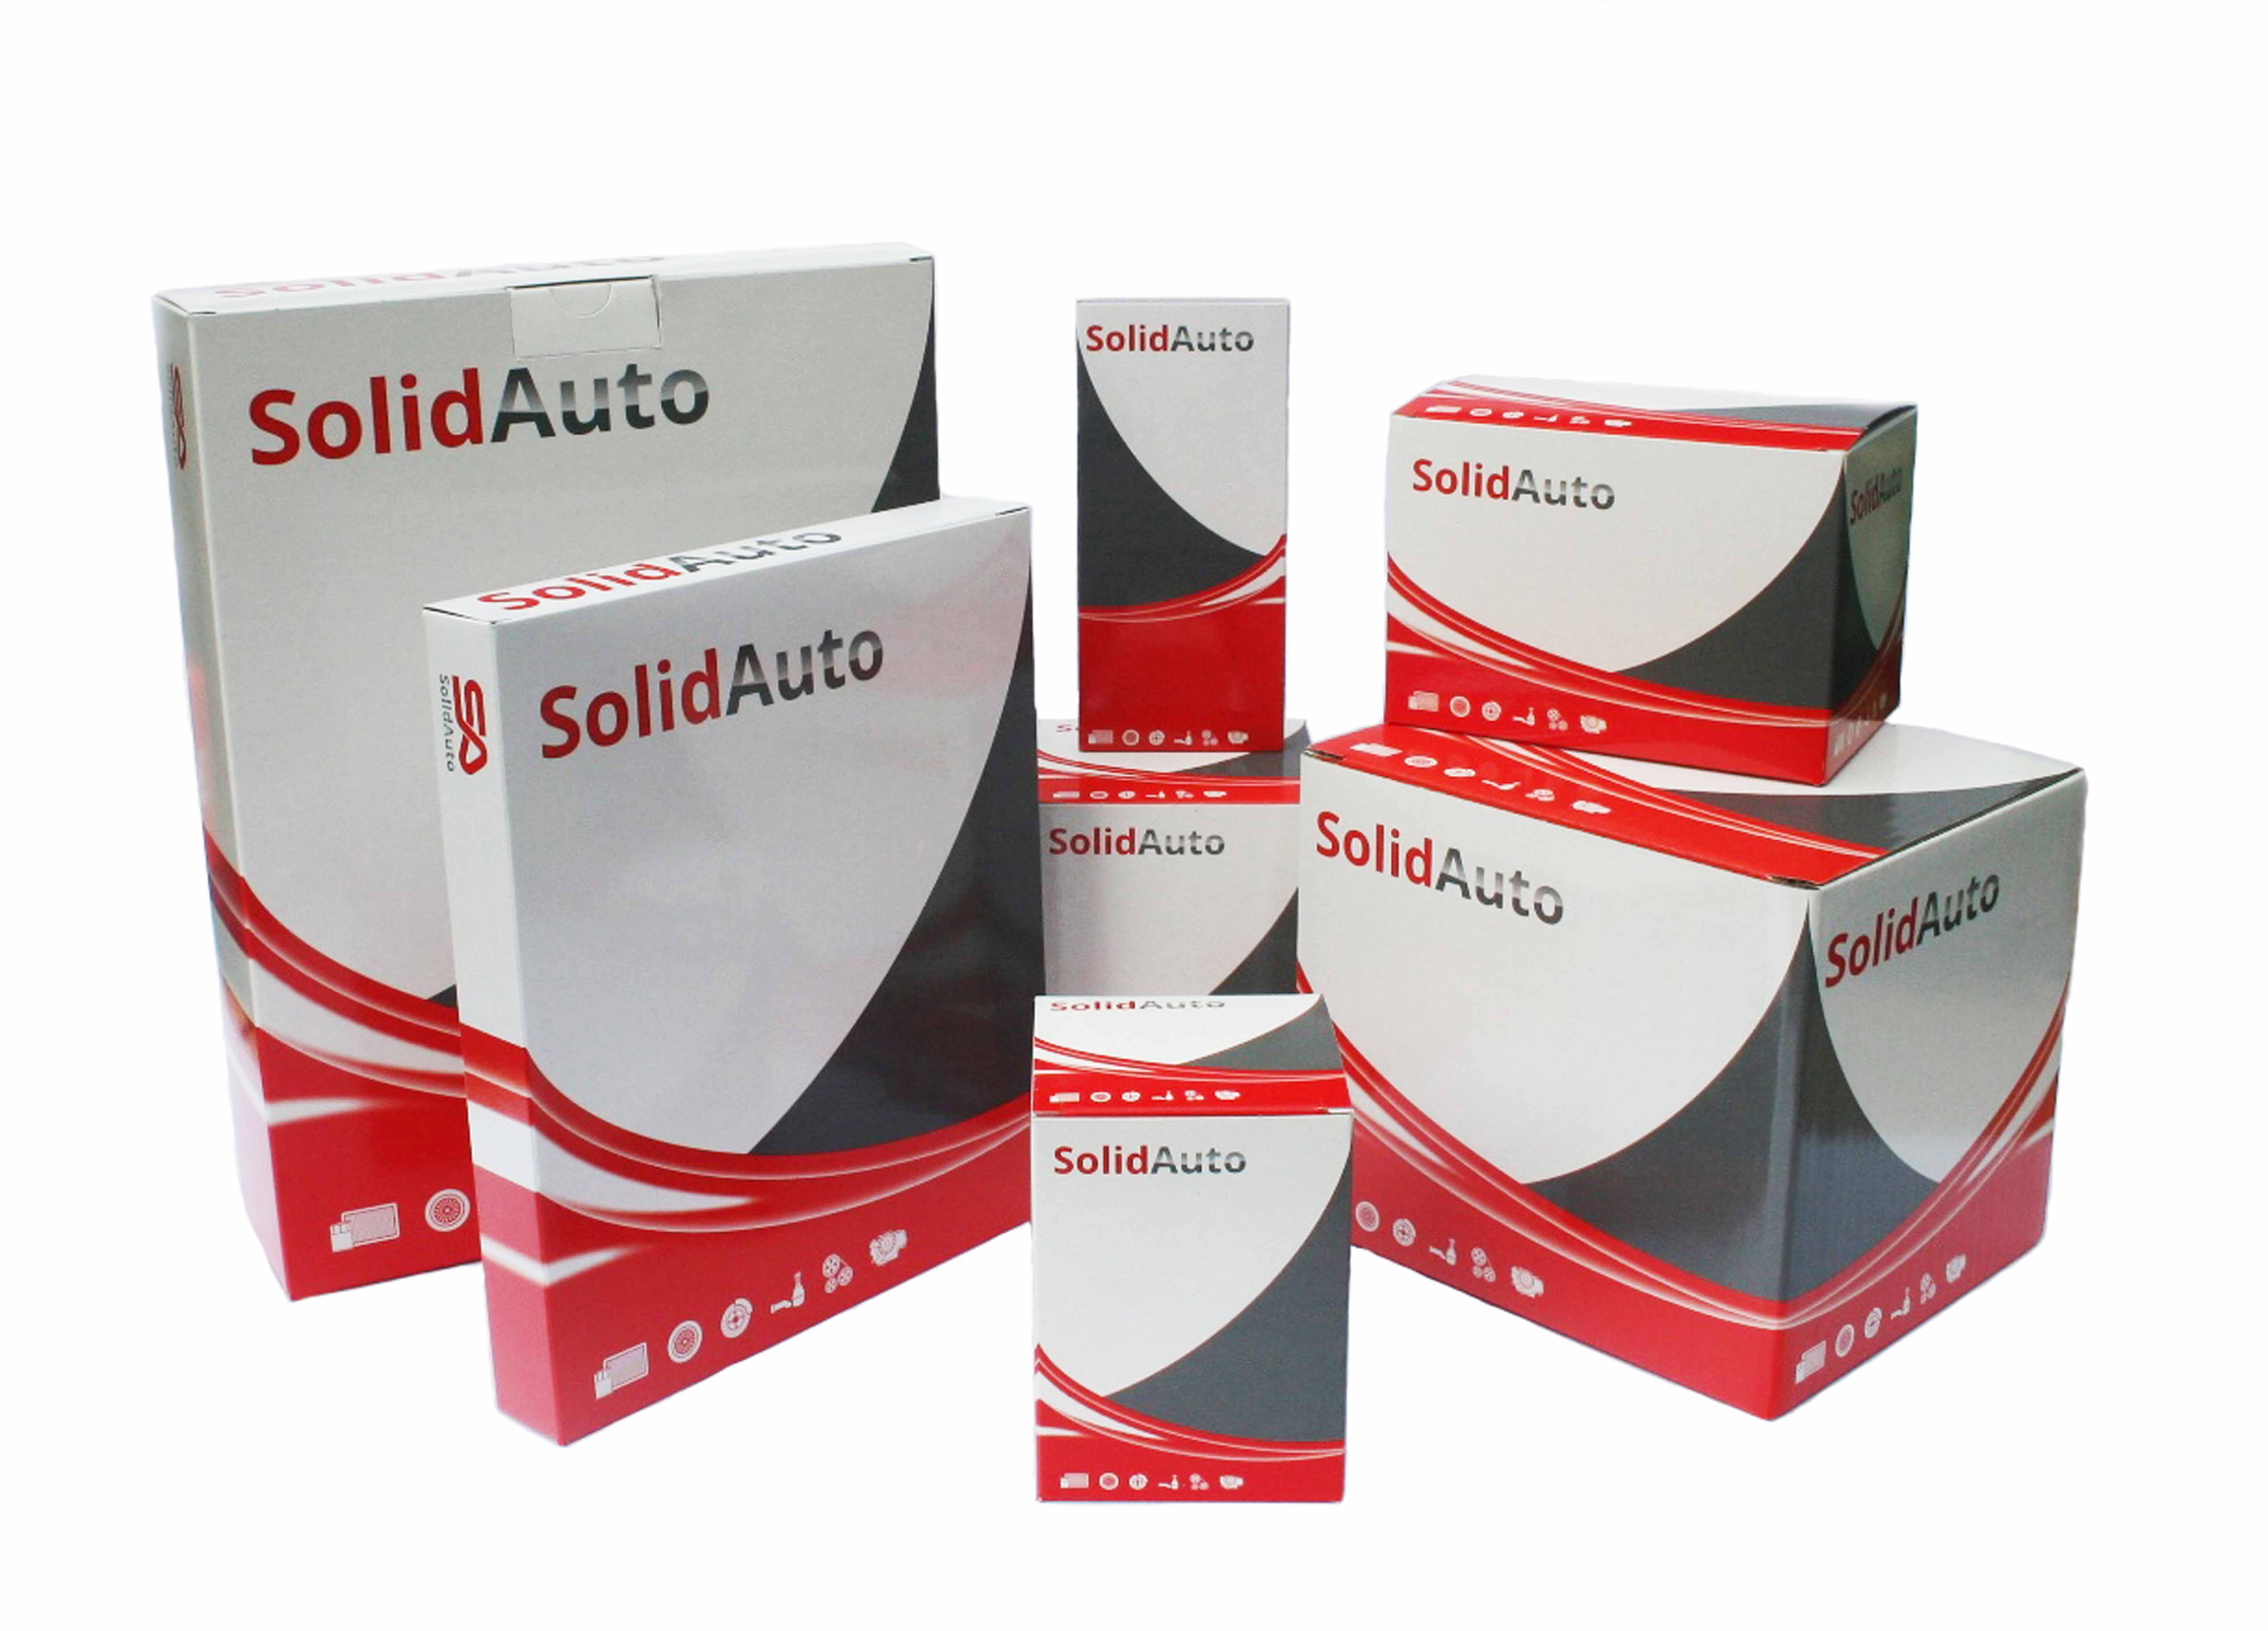 New corporate identity for Solid Auto UK